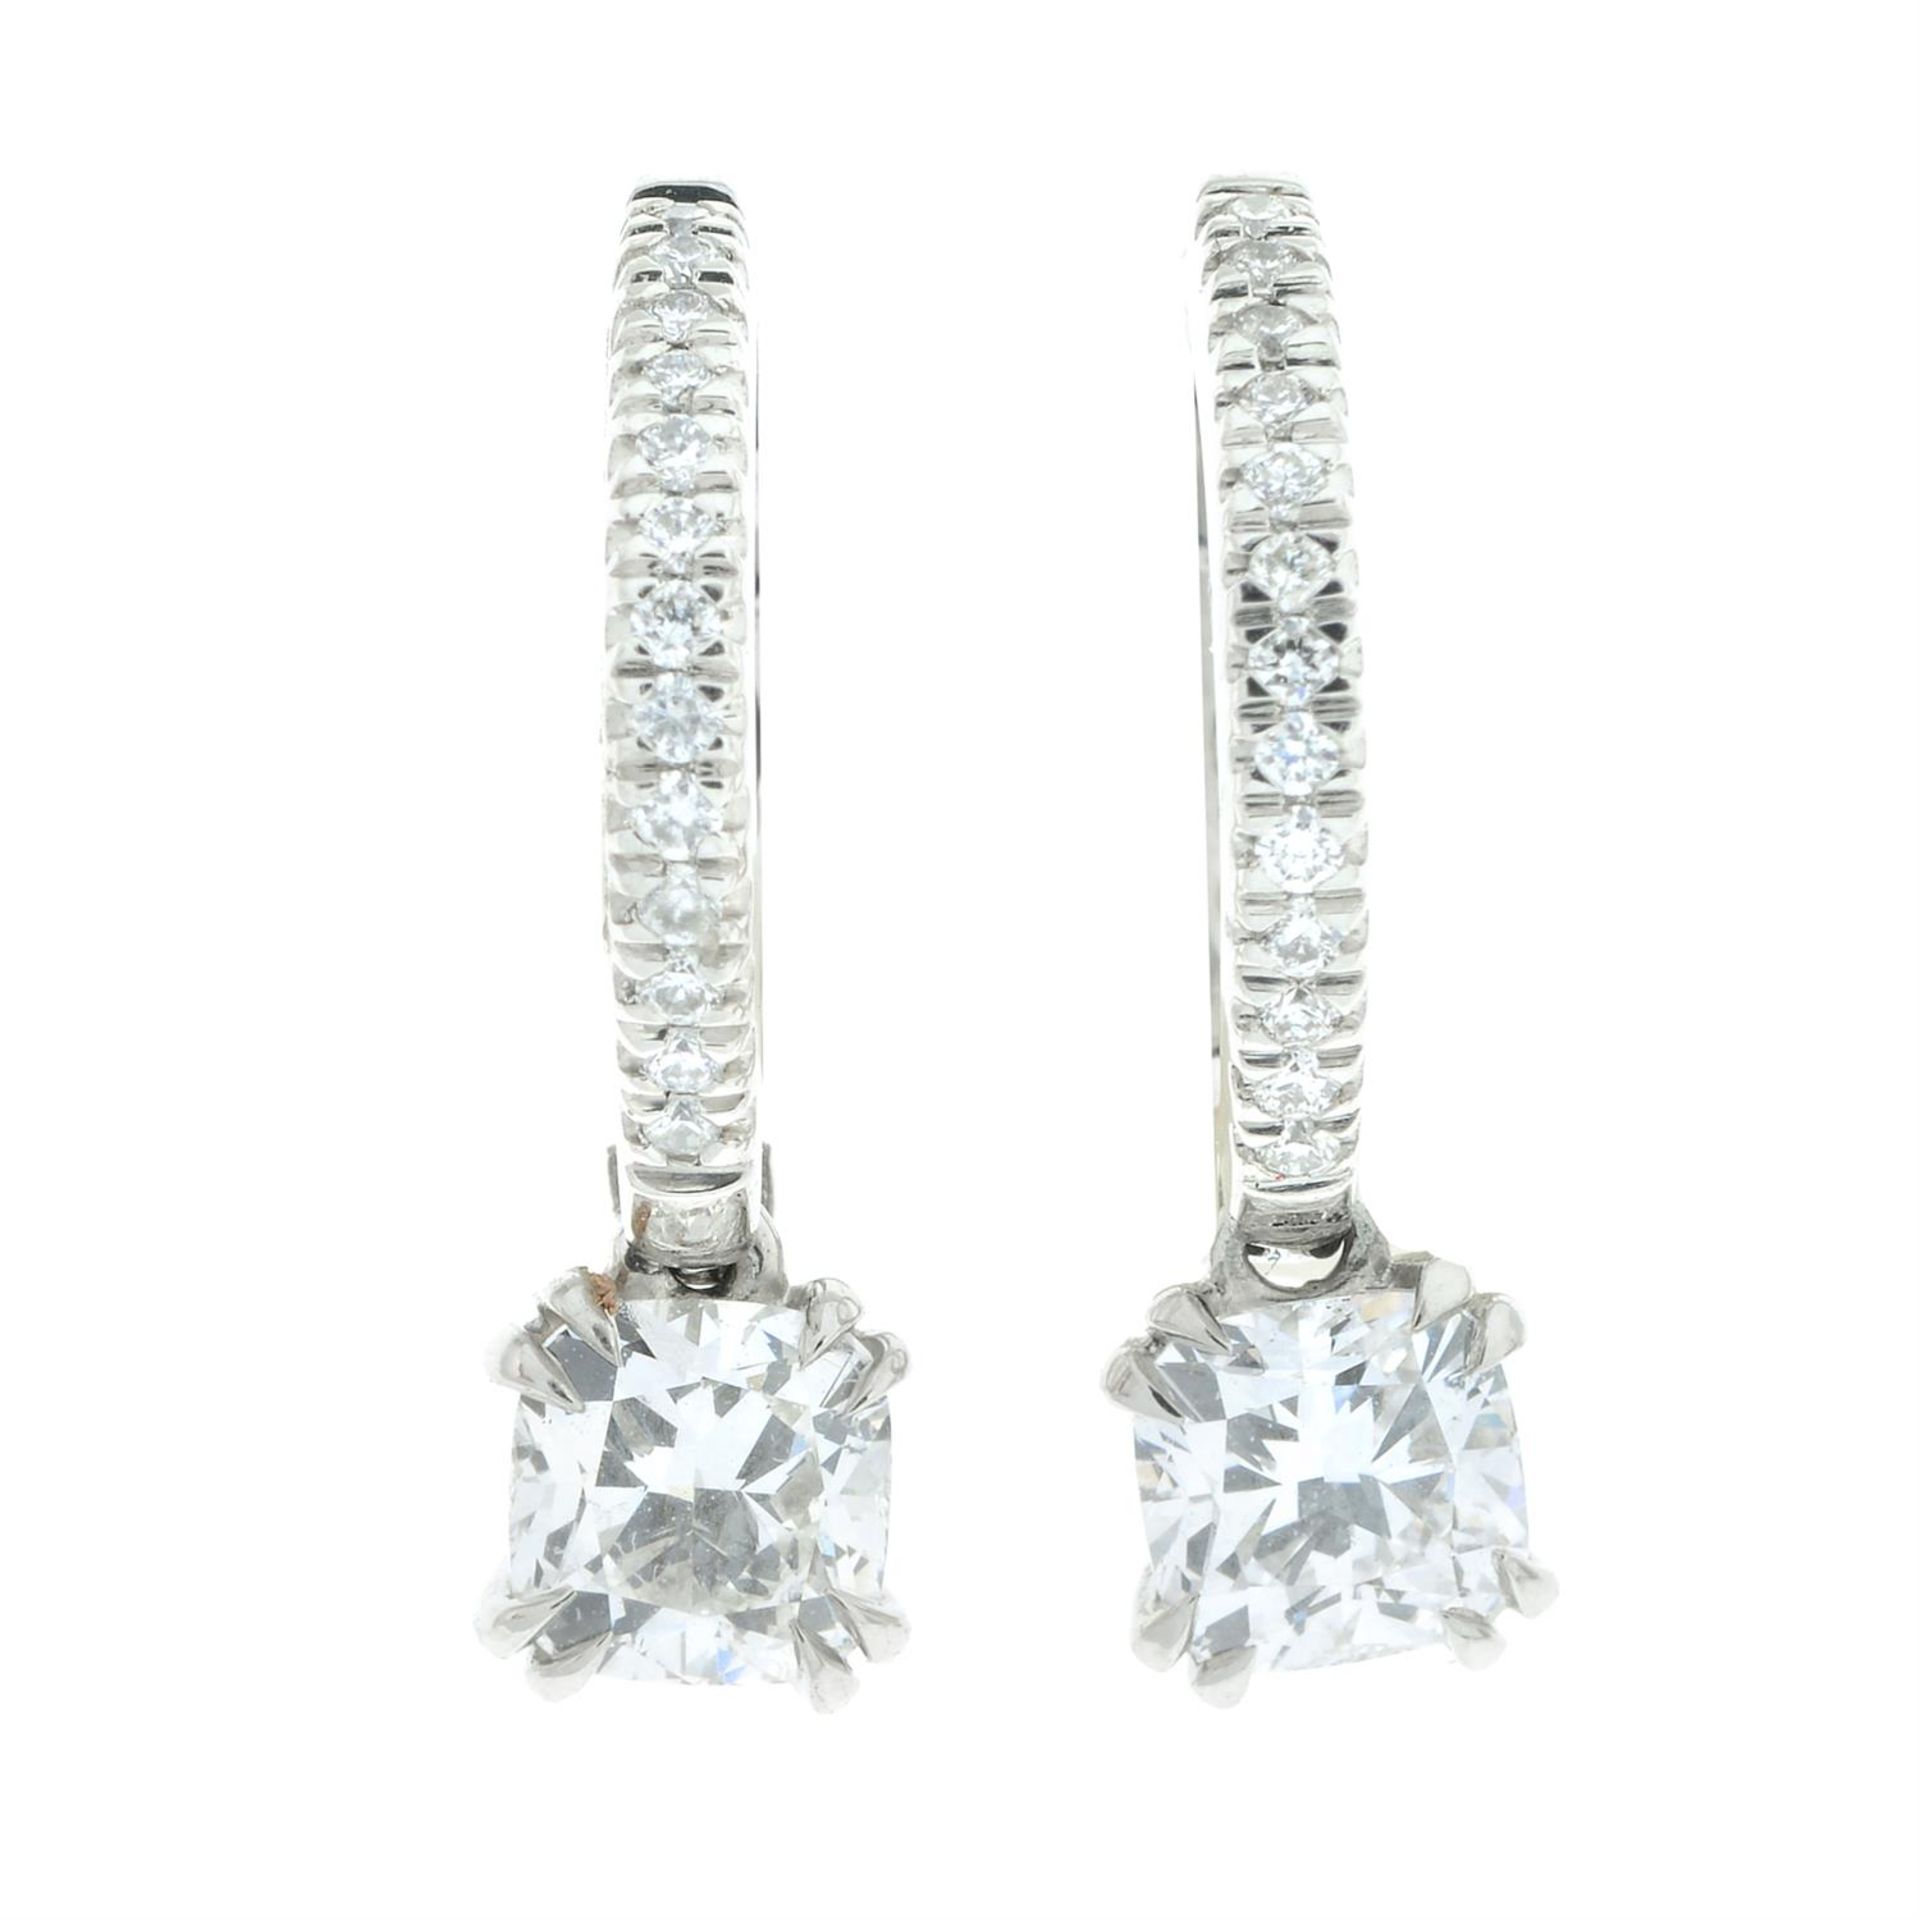 Platinum diamond earrings, by Mappin & Webb - Image 2 of 4